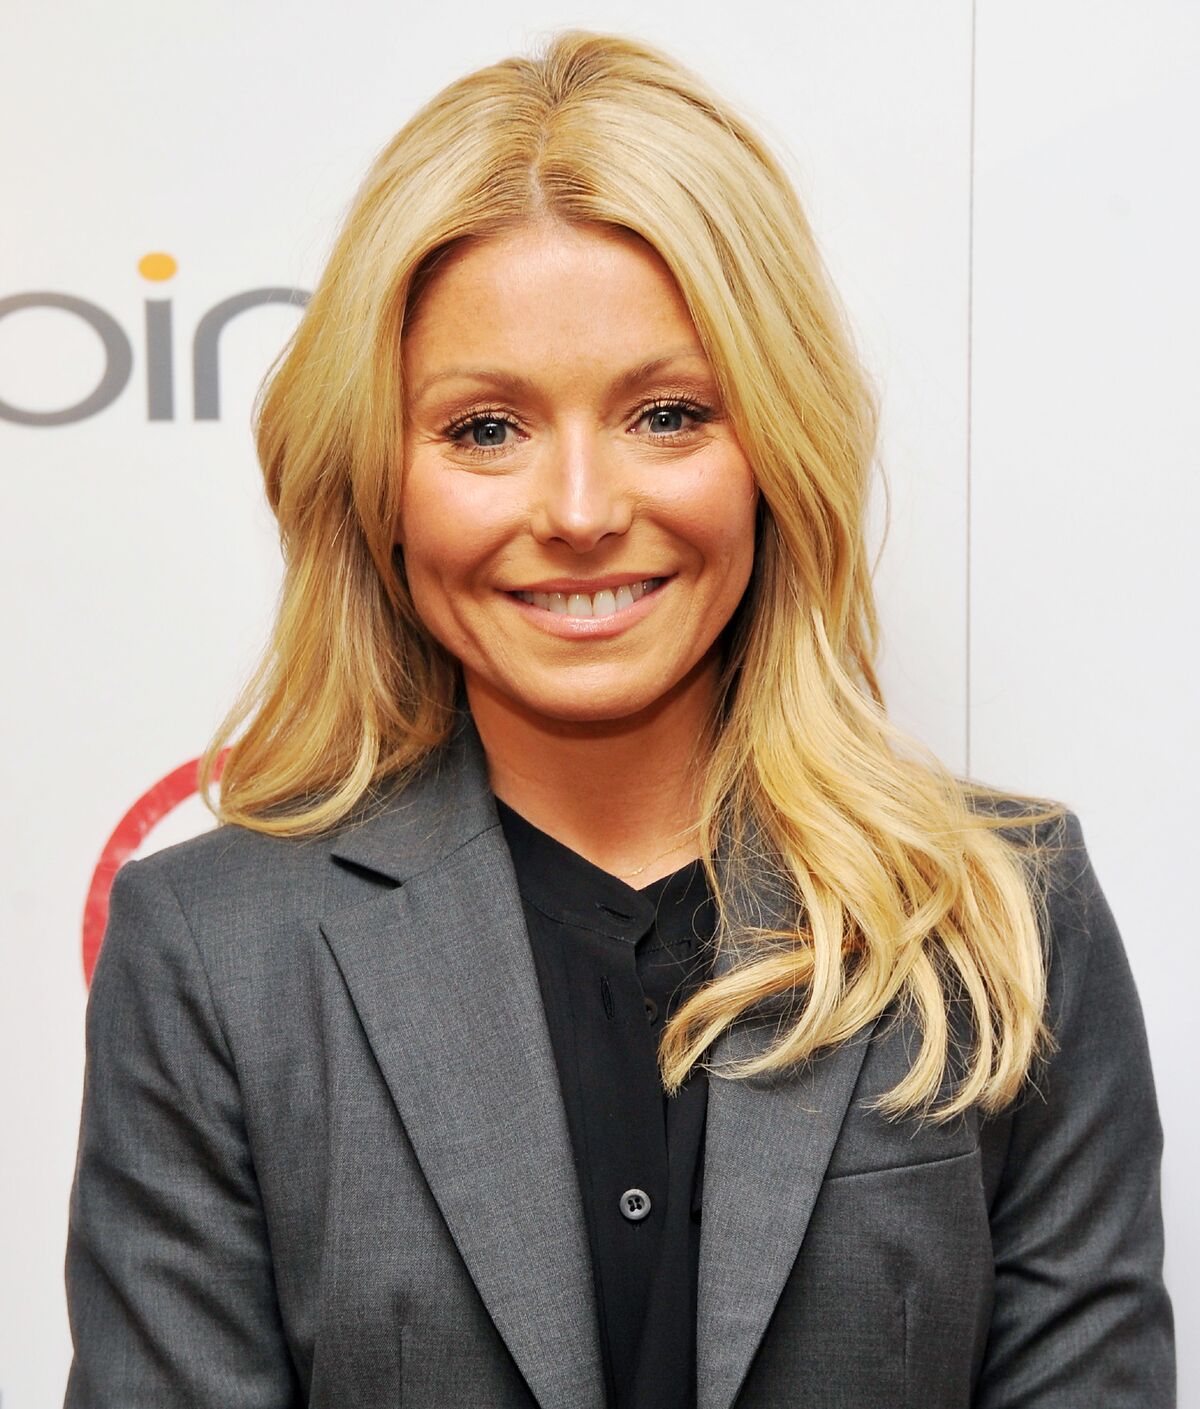 Kelly Ripa attends The Weinstein Company & Bing screening Of "Bully" on March 11, 2012 in New York City. | Photo: Getty Images